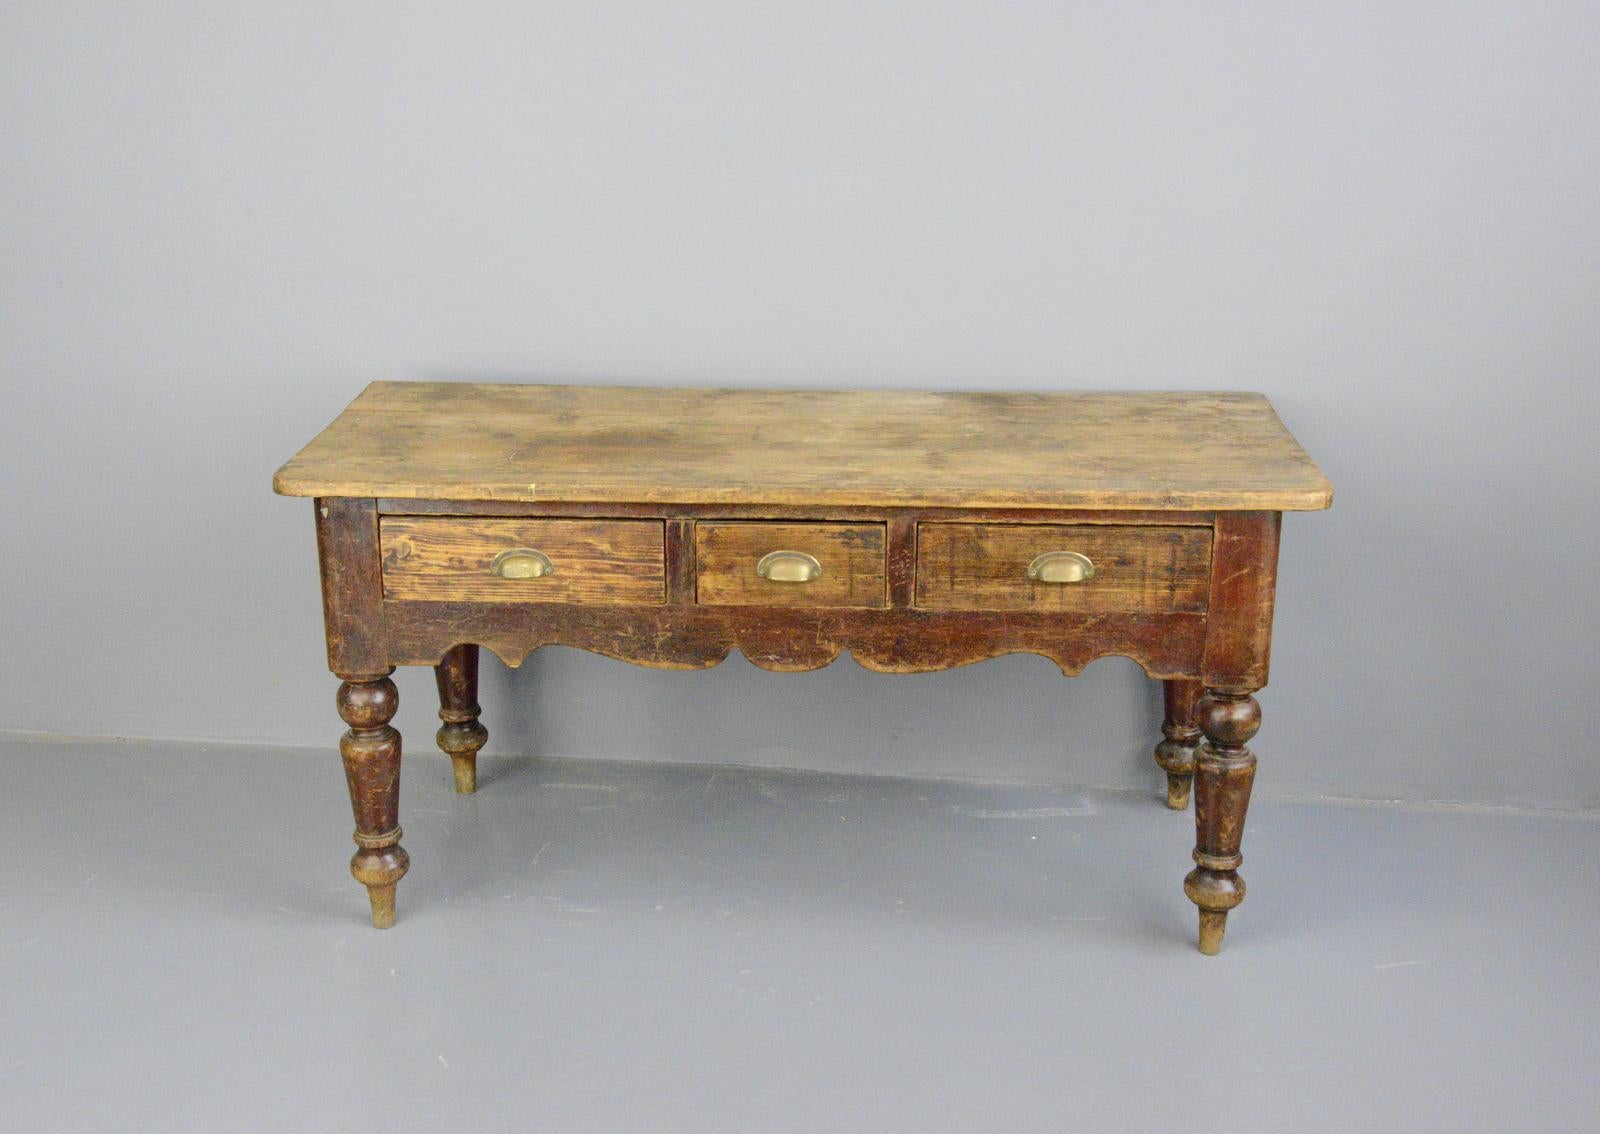 Late Victorian Florists table, 
- Beautifully worn pine top
- Original worn red paint
- Turned legs
- 3 drawers with solid brass cup handles
- English, 1900
- Measures: 154 cm long x 65 cm deep x 77 cm tall.

Condition report:

All the